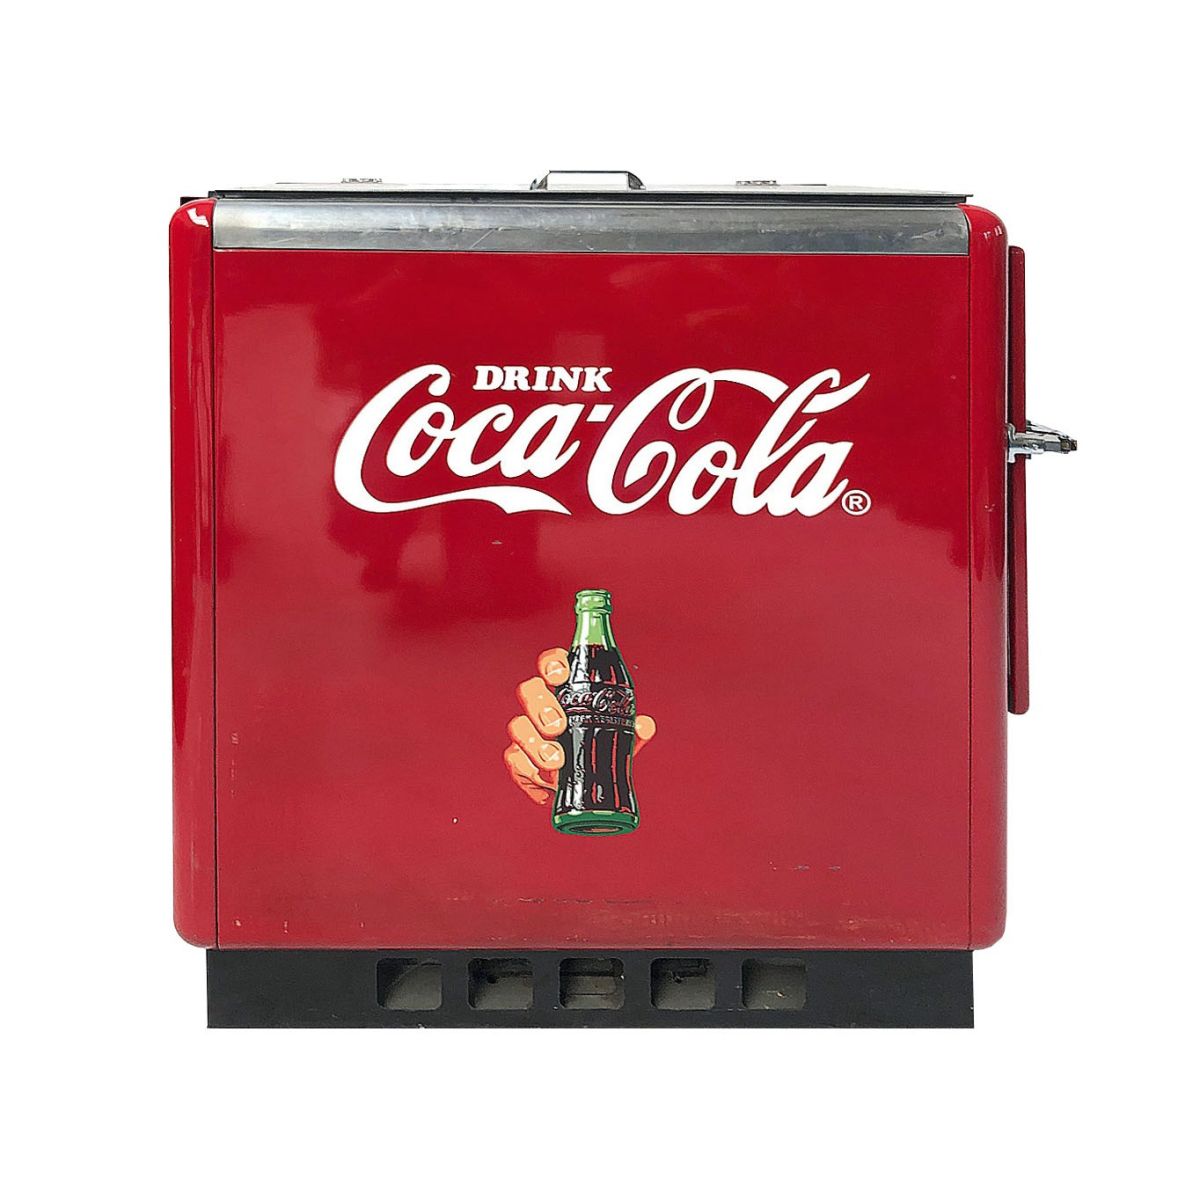 Original Coca-Cola Cooler with Top and Side Access